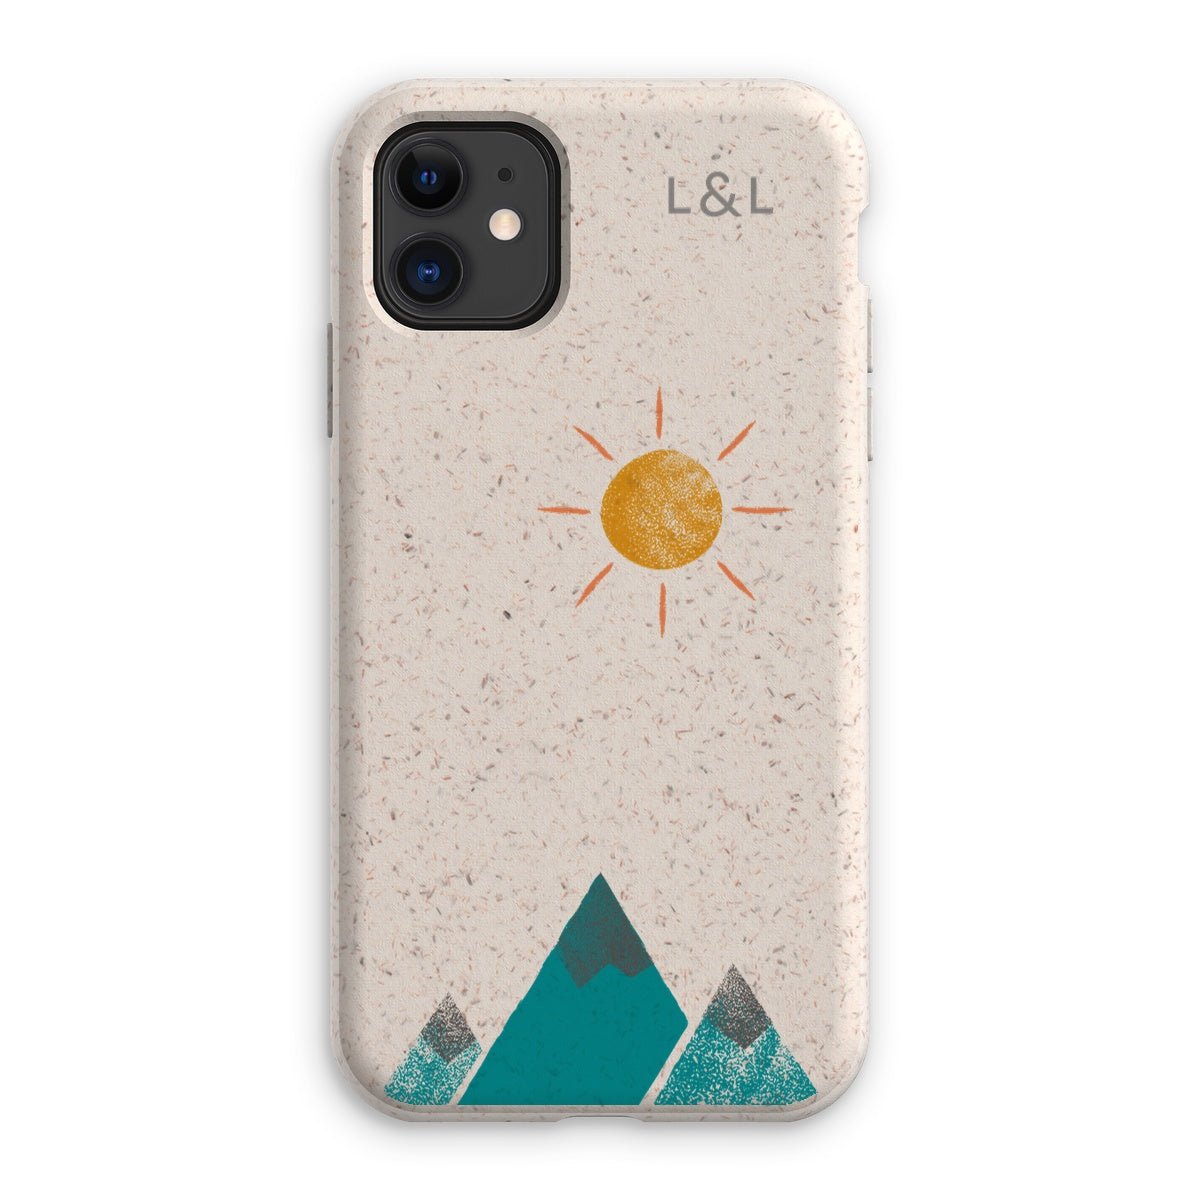 Morning in the mountains Eco Phone Case - Loam & Lore